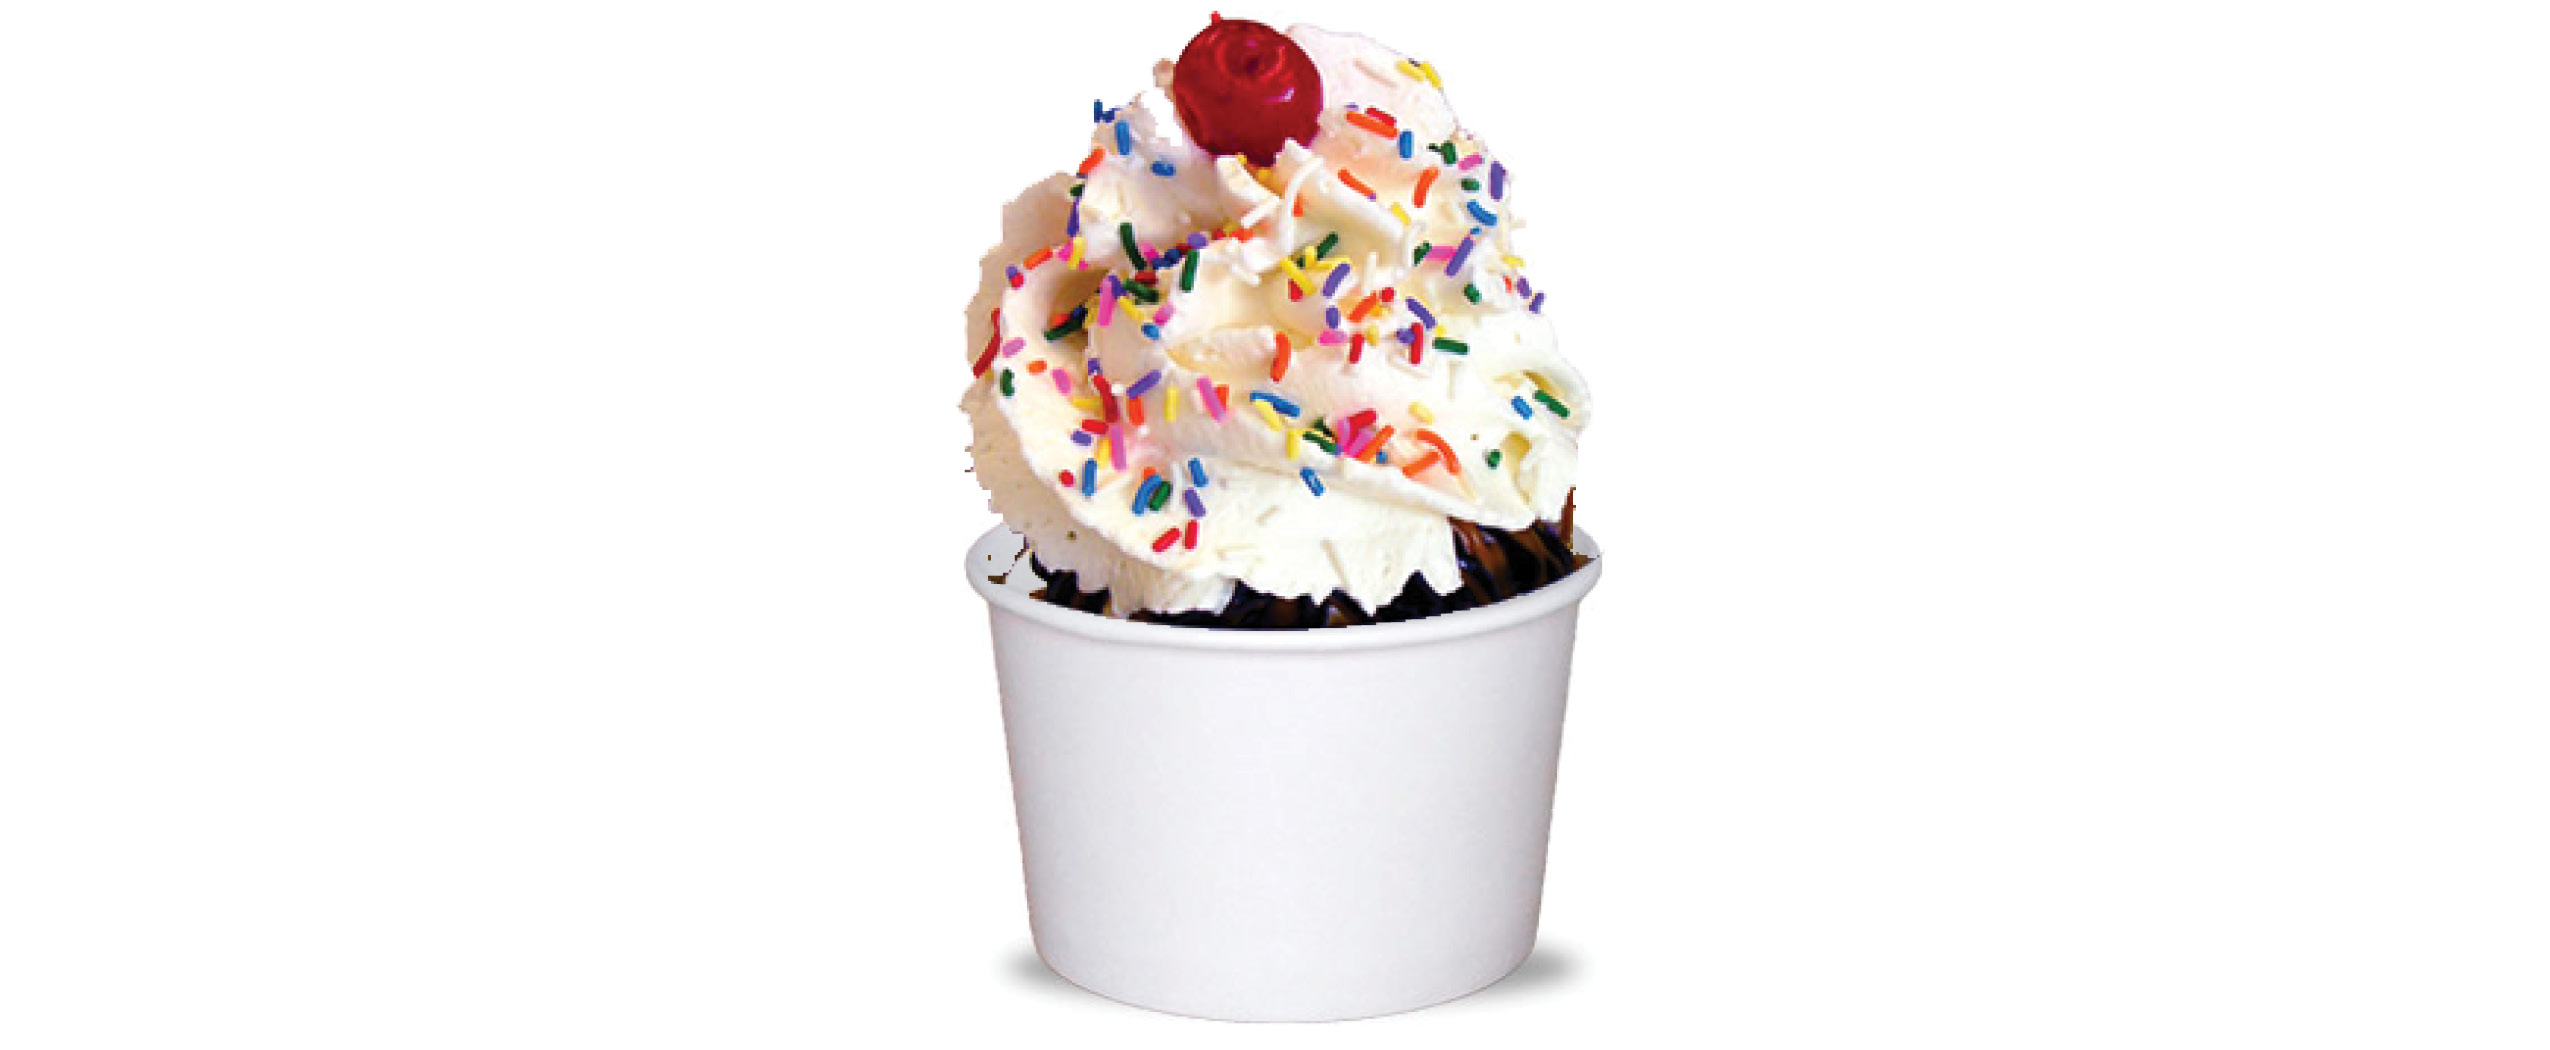 Build your Sundae with a variety of yummy toppings!